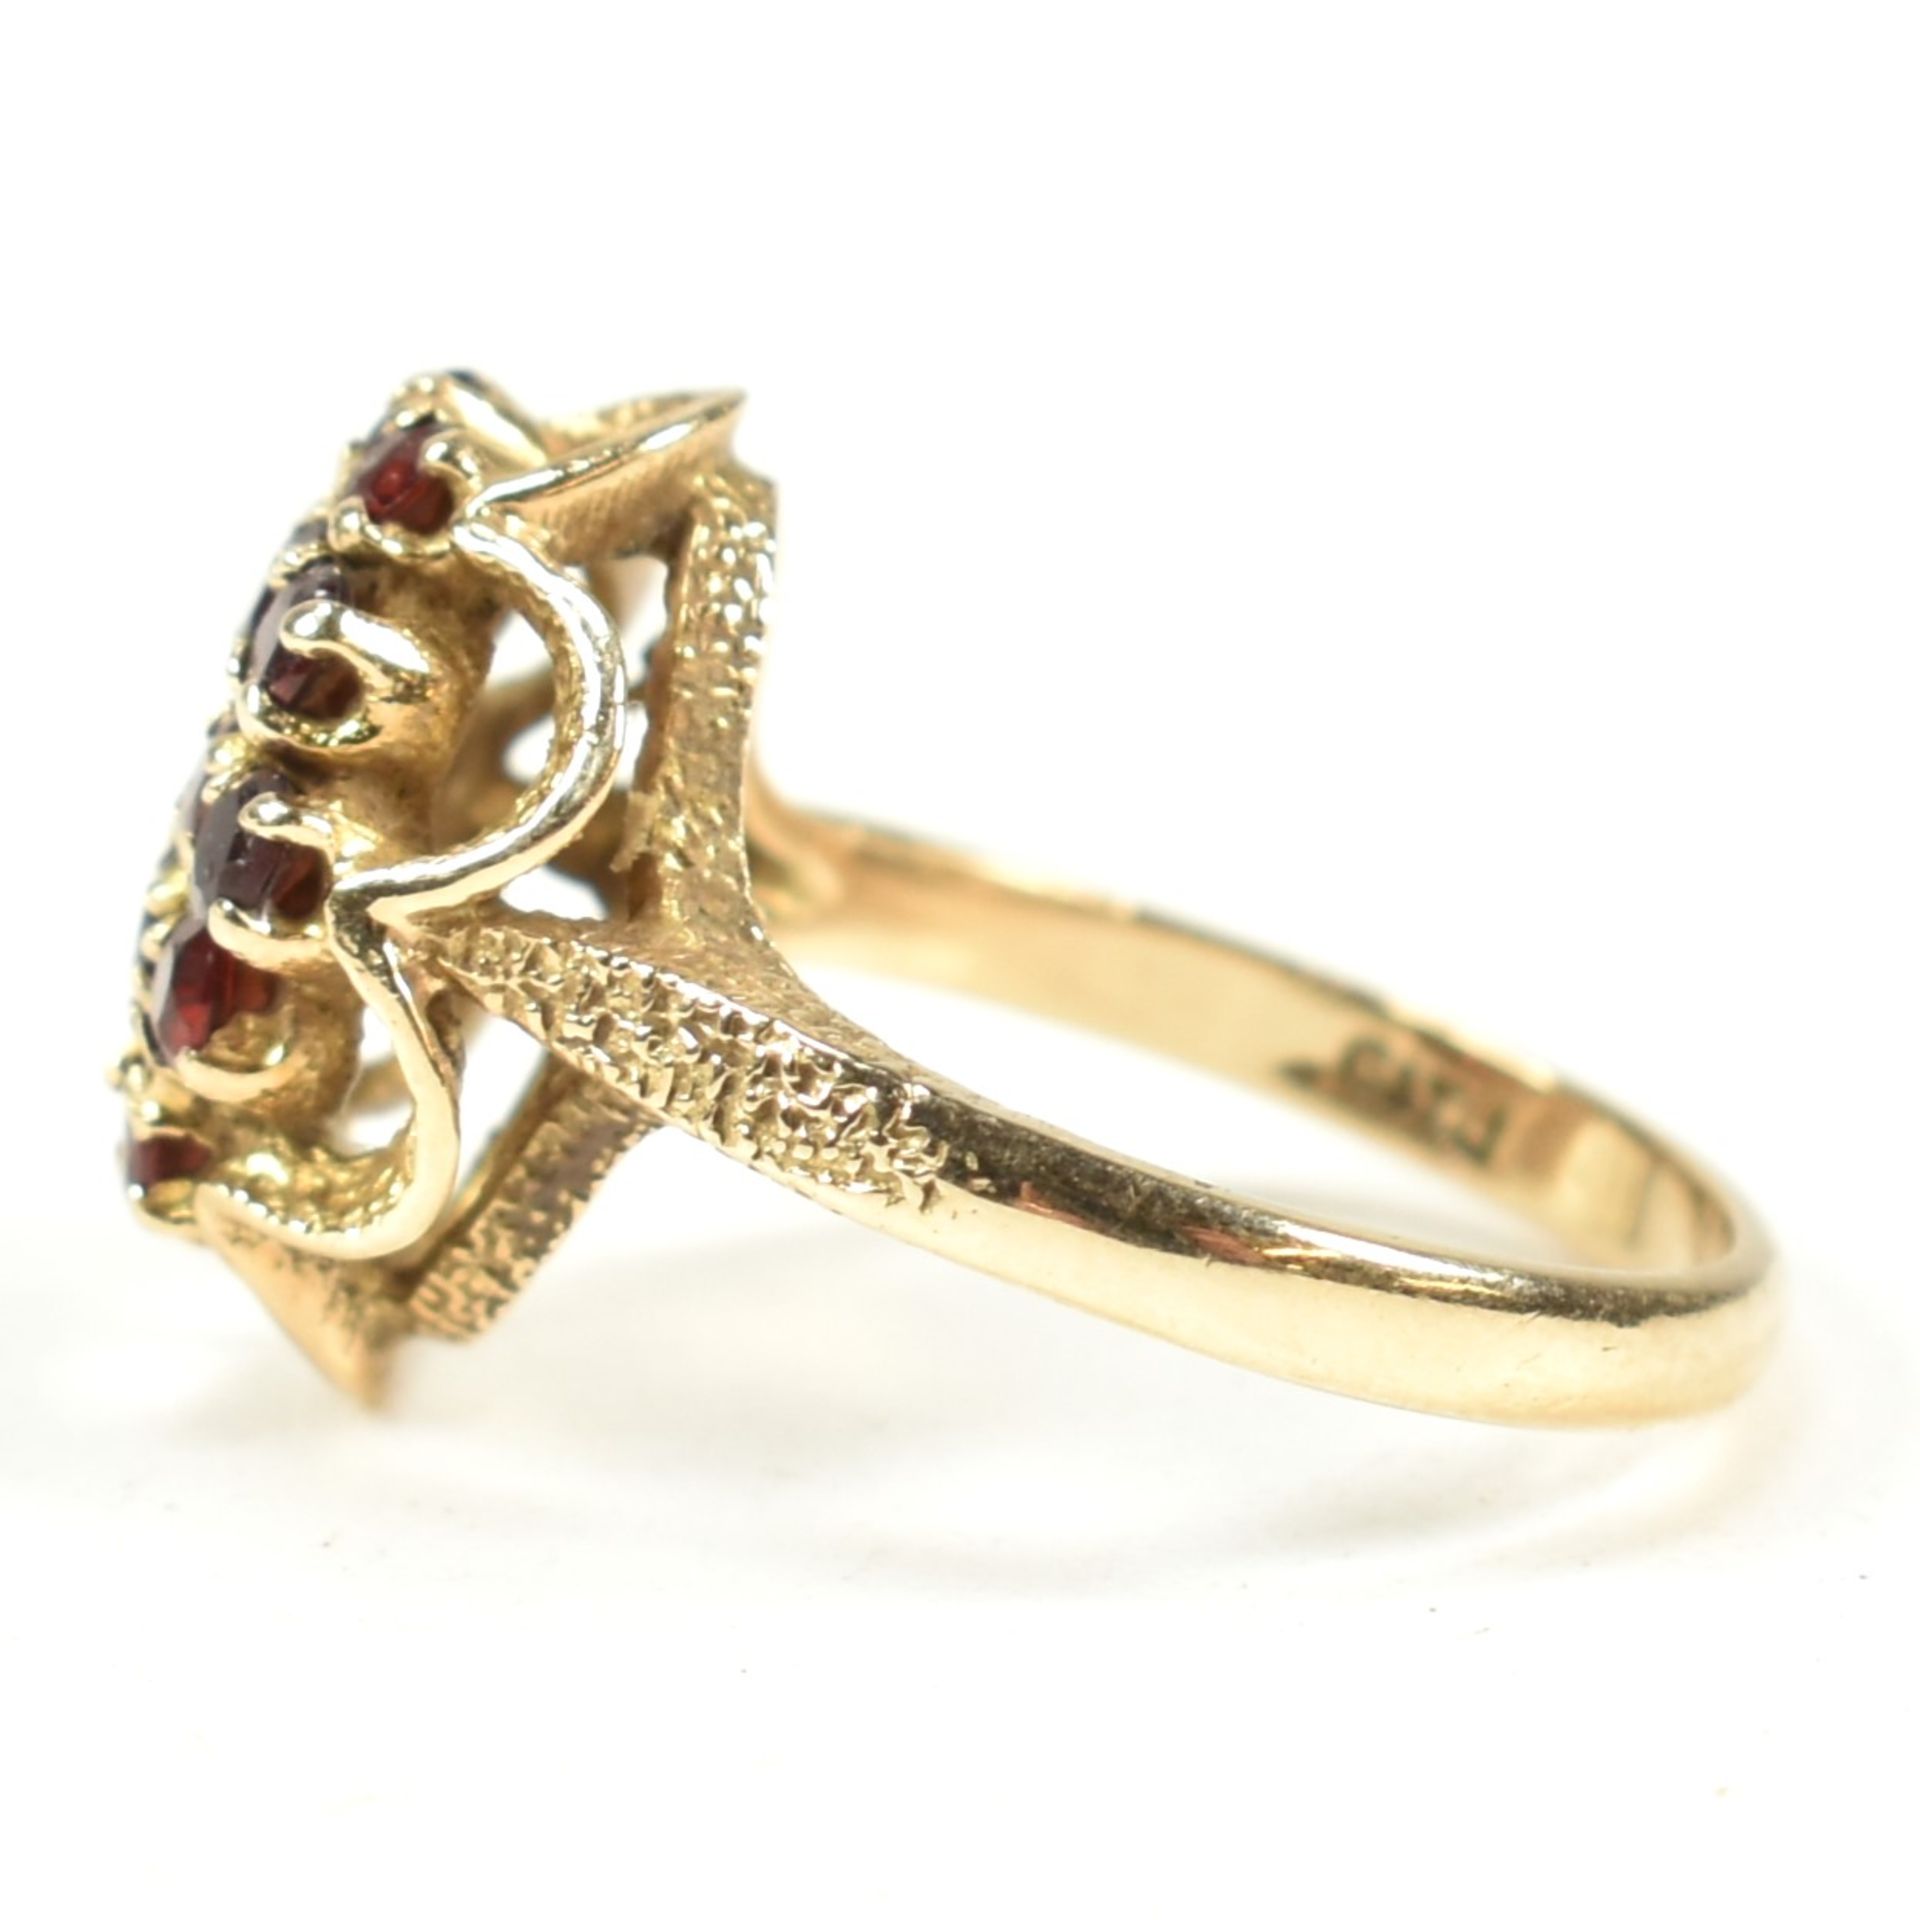 HALLMARKED 9CT GOLD CLUSTER RING - Image 6 of 10